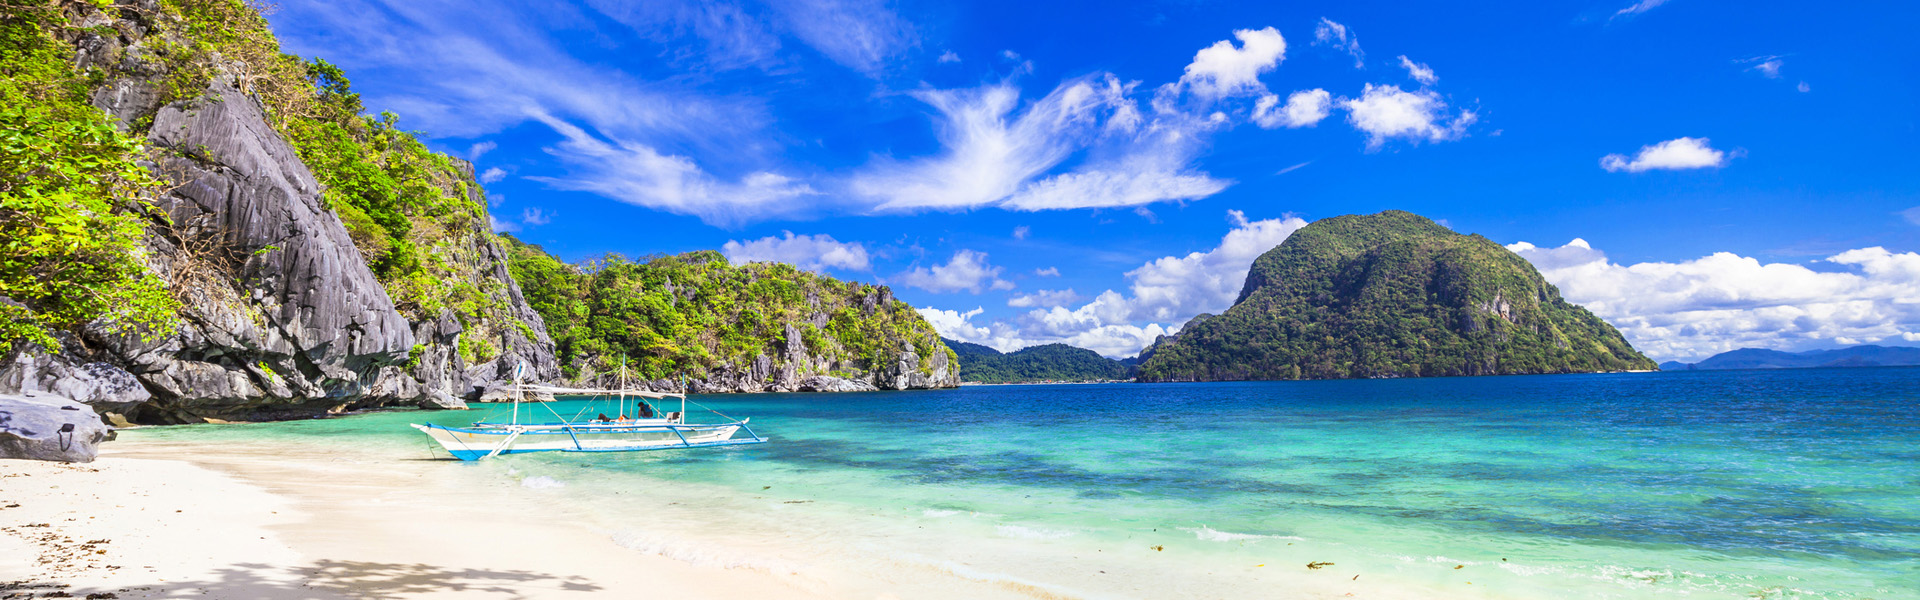 tropical scenery of Palawan, Philippines